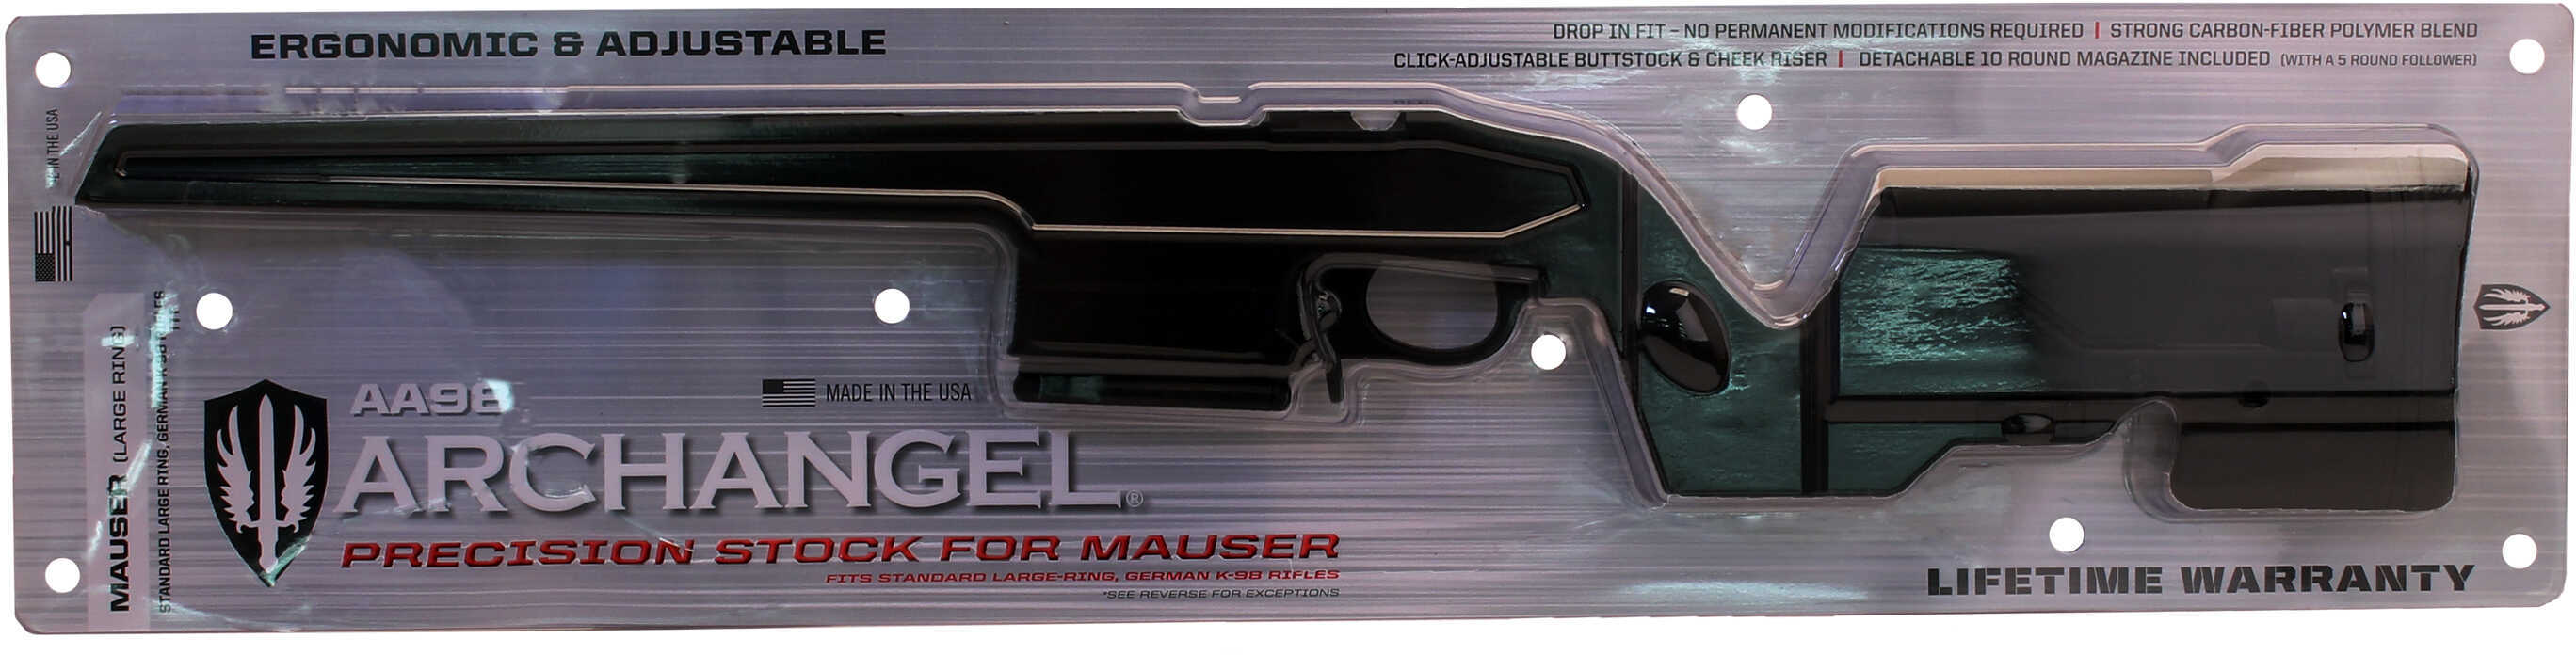 Pro Mag Mauser K-98 Archangel Precision Stock AA98-img-1